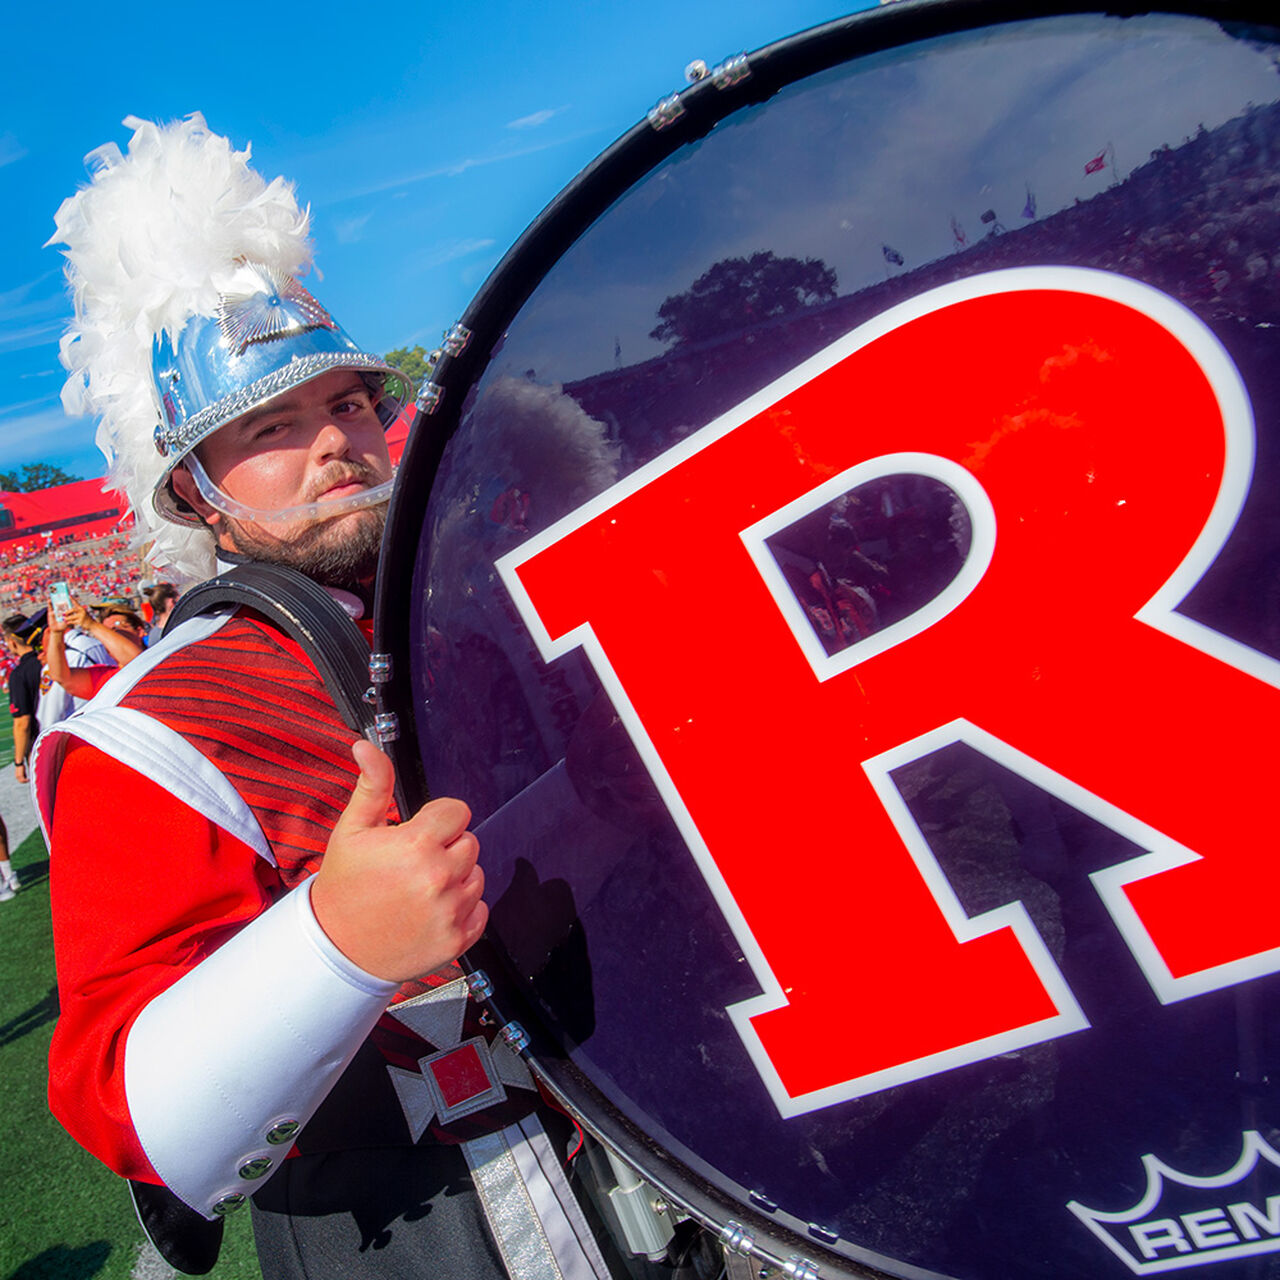 Bass drum player in the Scarlet Knight Marching Band giving a thumbs up to the camera image number 0